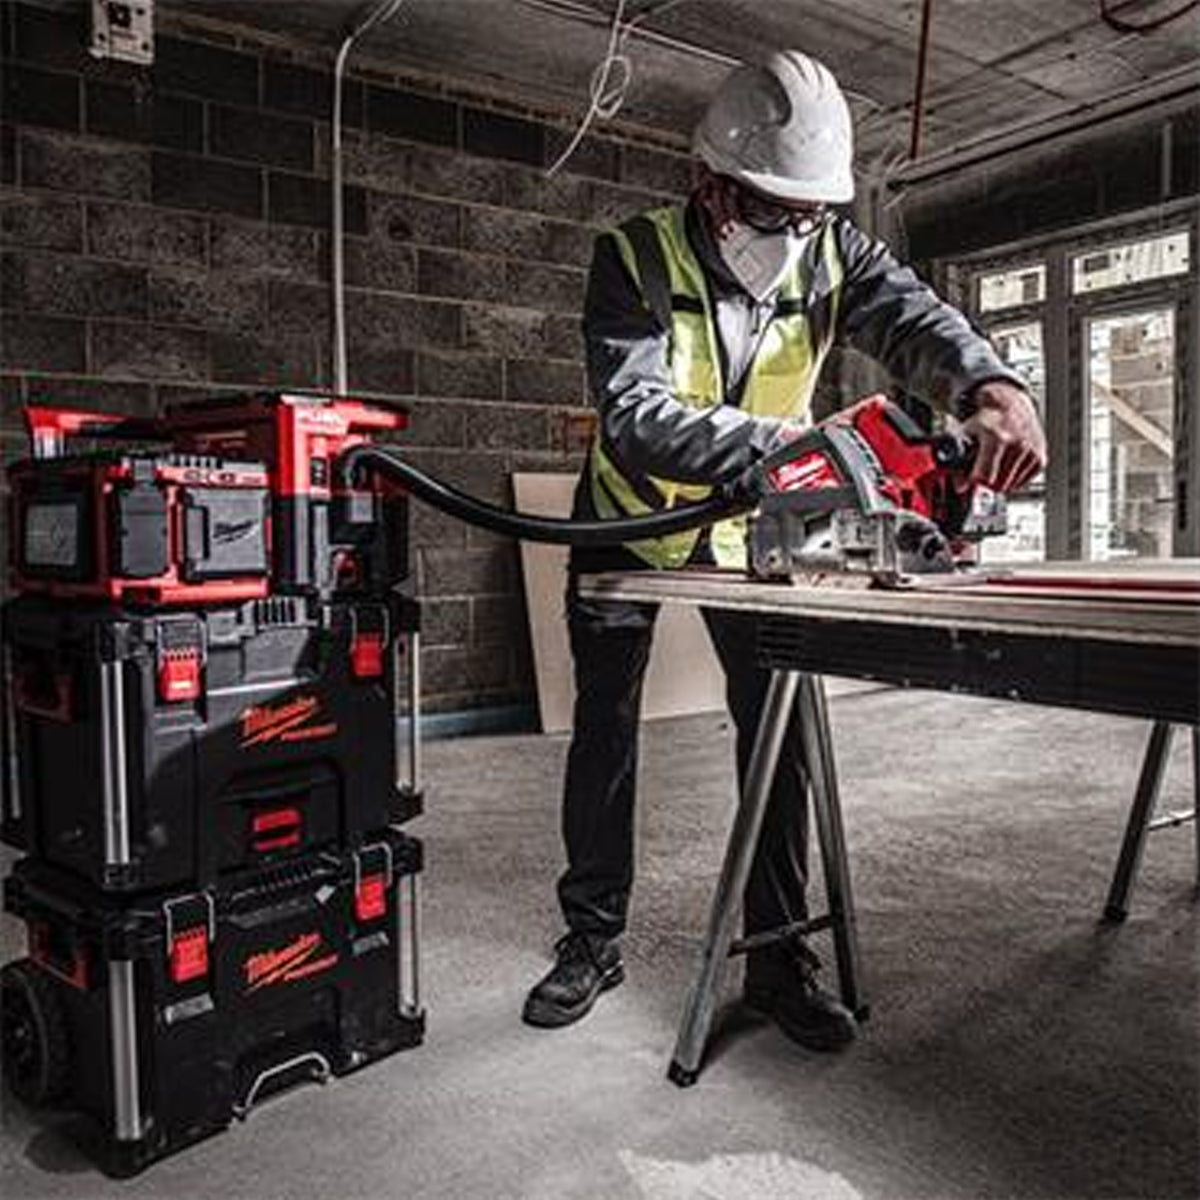 Milwaukee M18FPS55-552P 18V 165mm Fuel Brushless Plunge Saw with 2 x 5.5Ah Battery & Guide Rail Kit